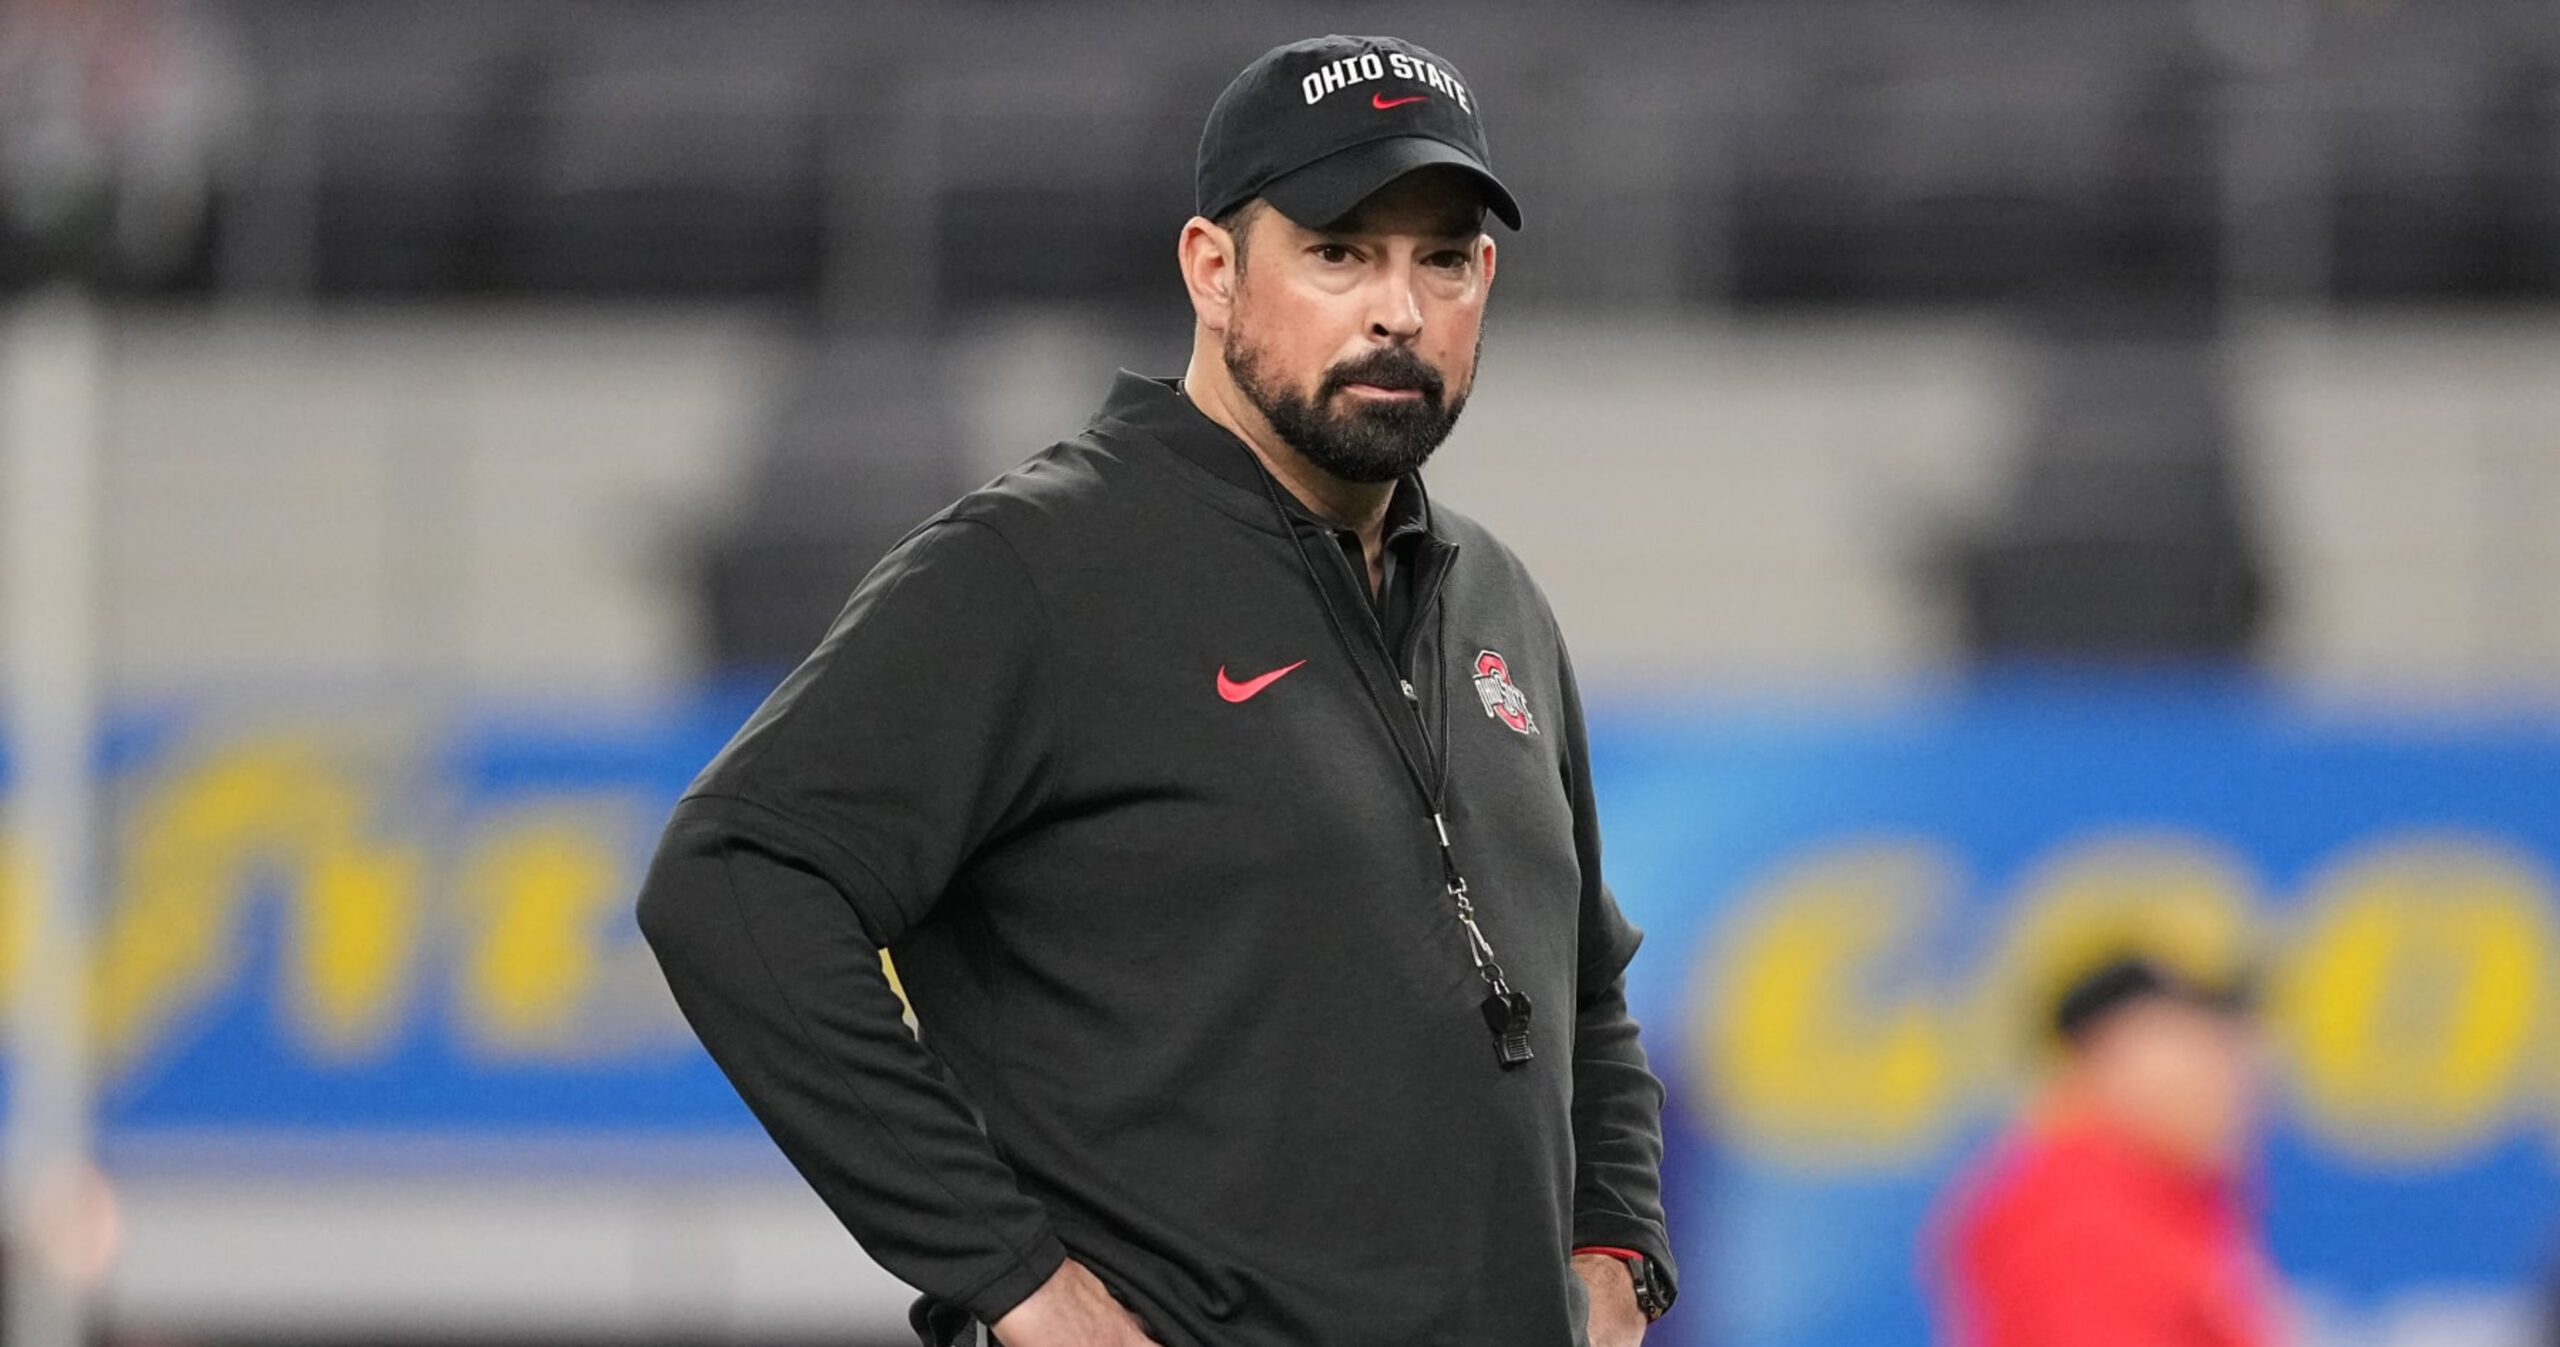 Ryan Day on Ohio State’s 2-Loss Season After Defeat to Missouri: ‘Not Good Enough’